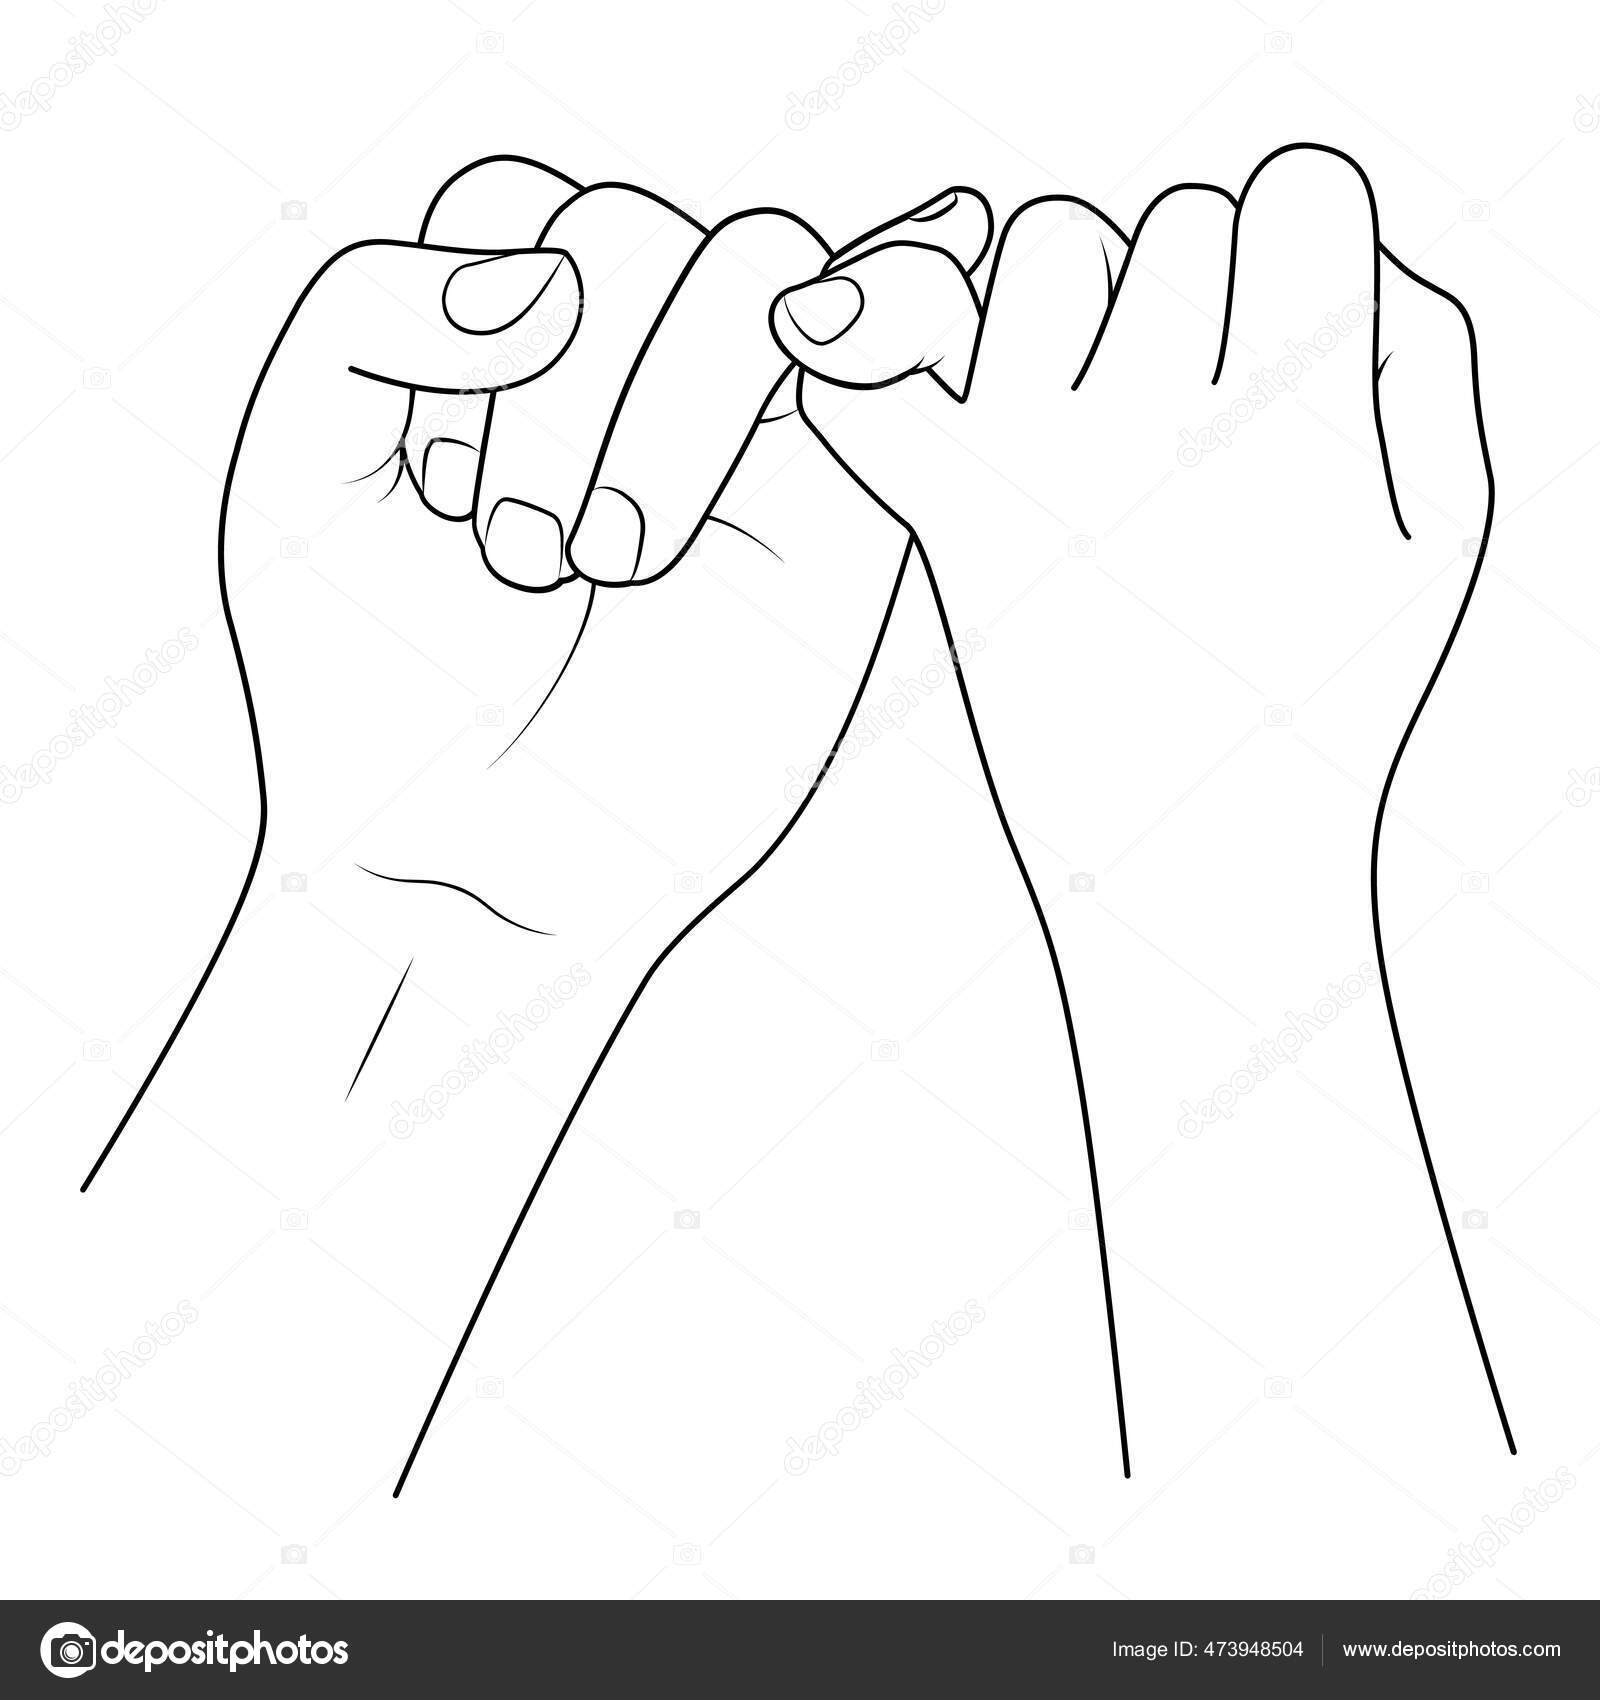 Holding Hands Outline Vector Illustration Doodles Hand Drawn Female Male Stock Vector Image By C Wowow